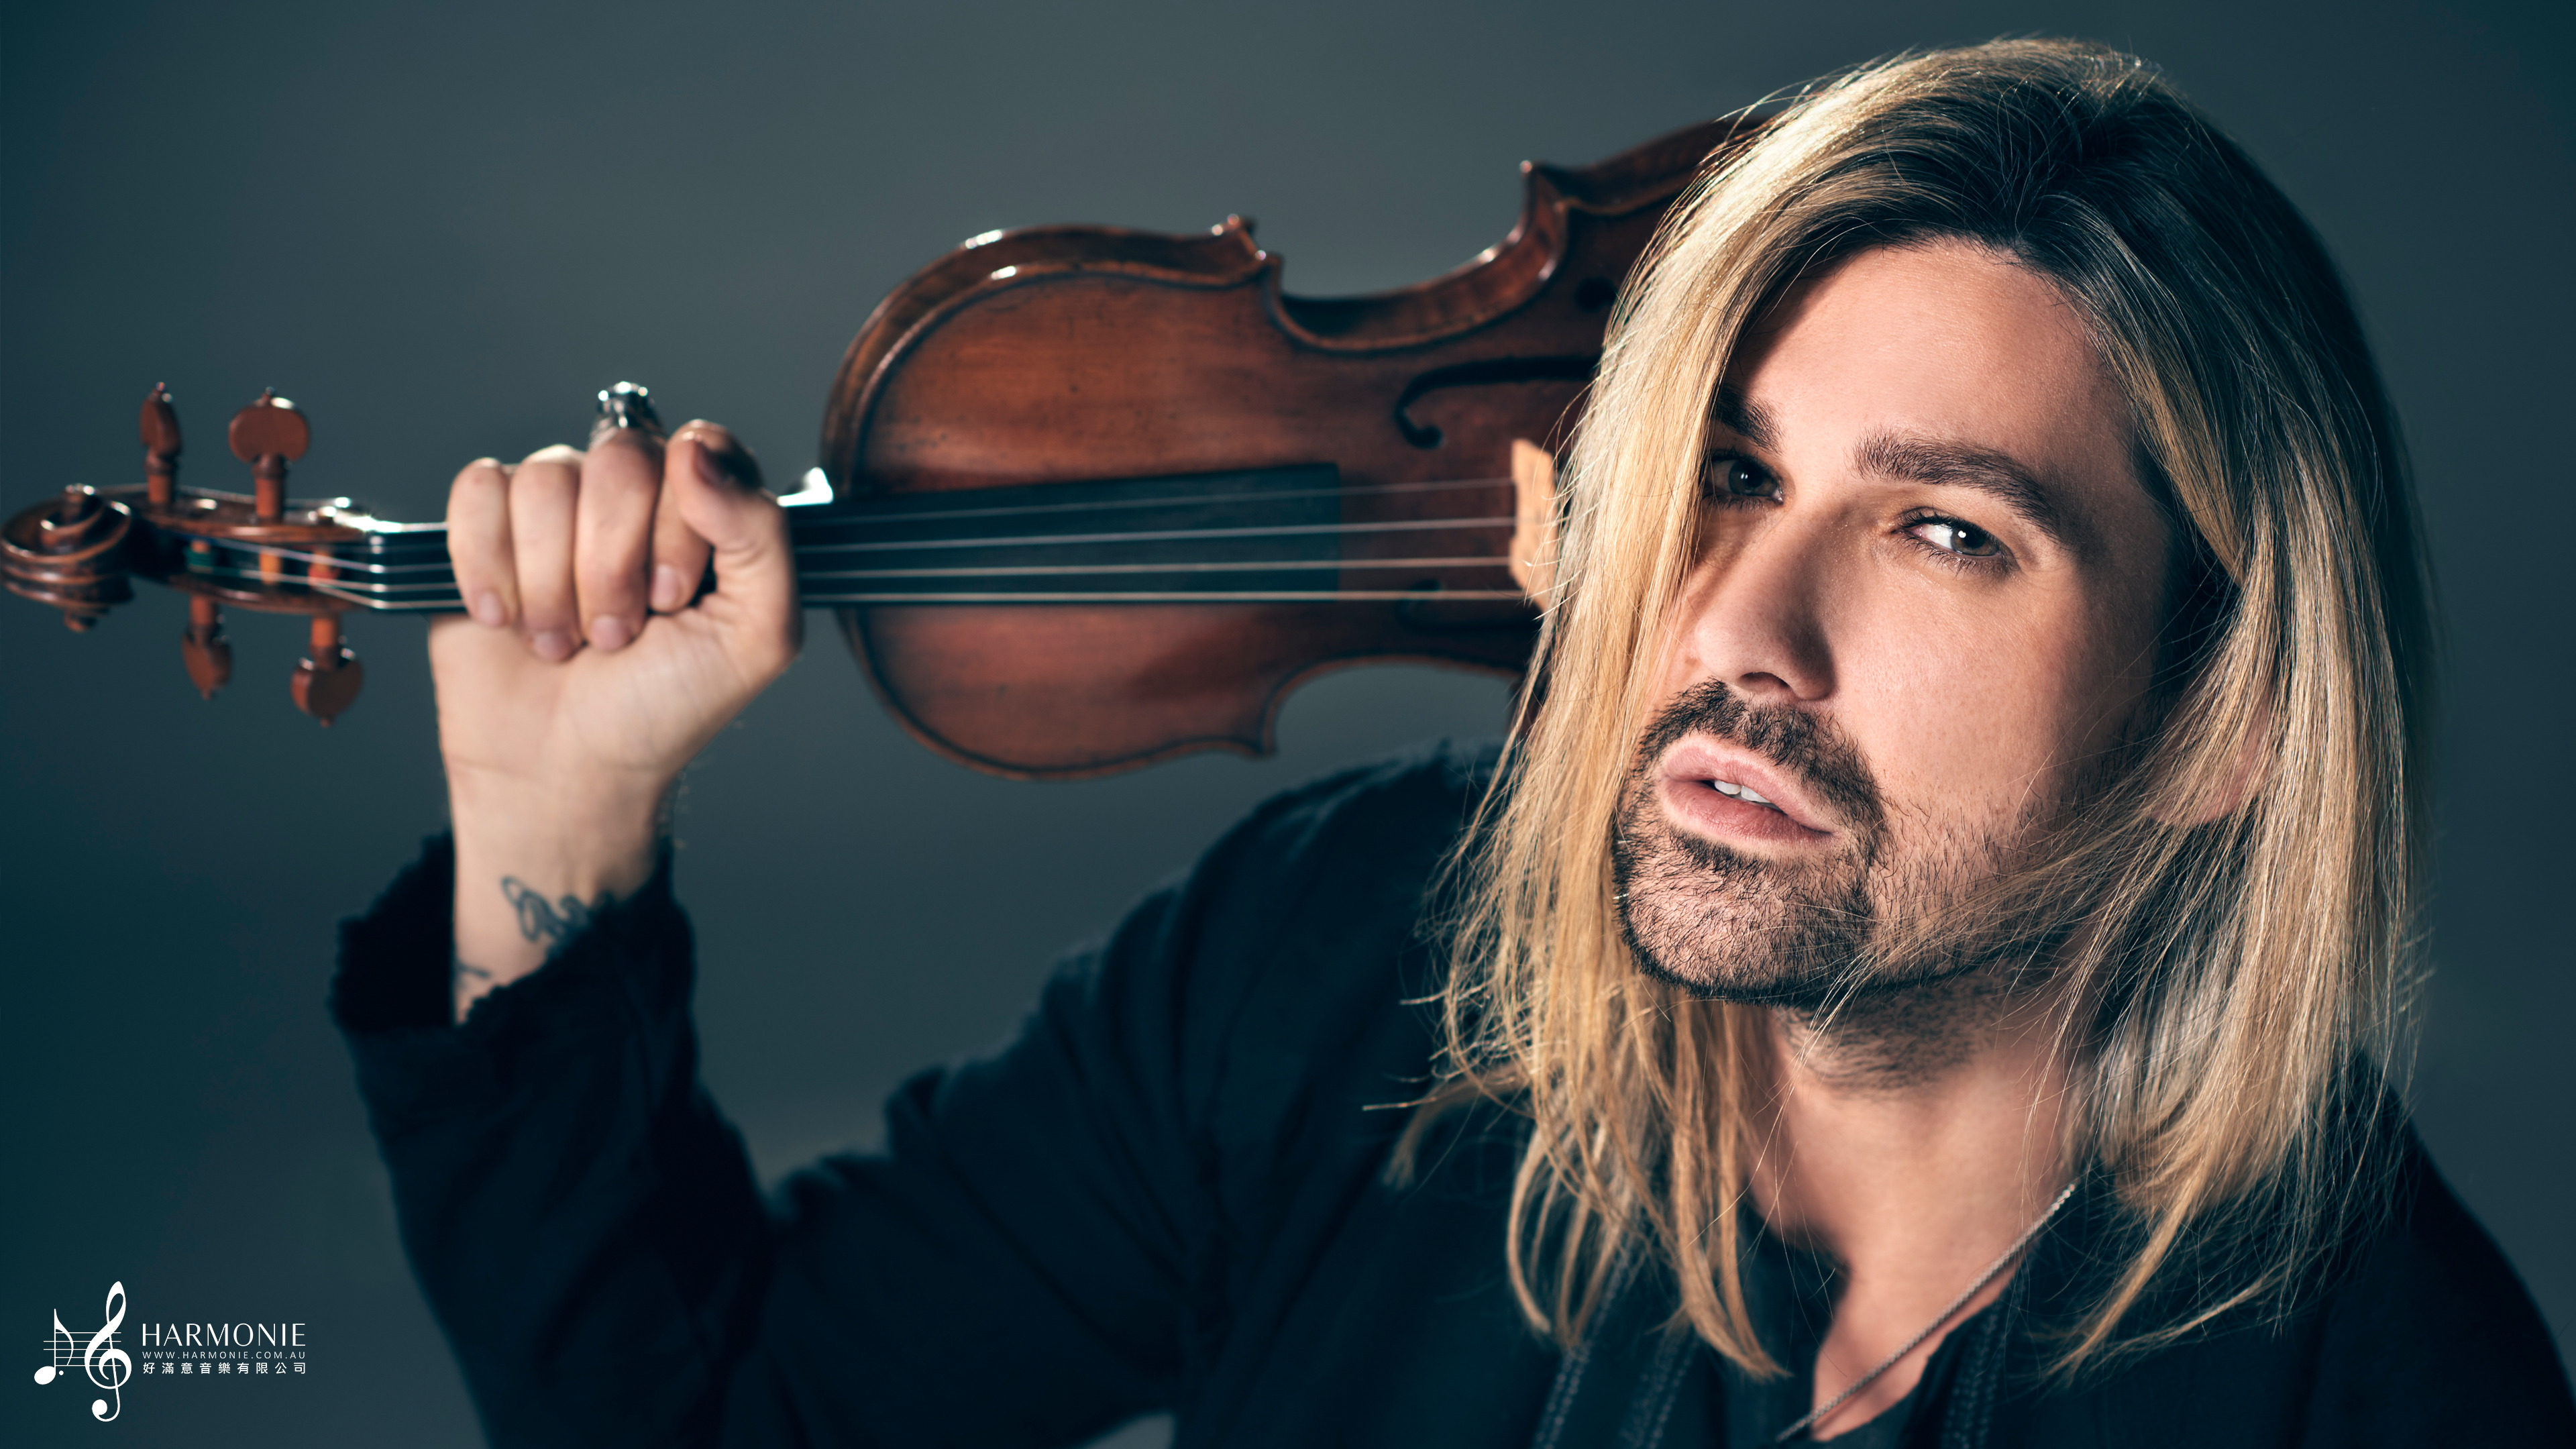 Violinist David Garrett’s career took off in 2007, for which he credits audiences in Hong Kong. With a repertoire that goes from Mozart to Metallica, he is back in the city to promote his new, classical album, Iconic. Photo: Harmonie International